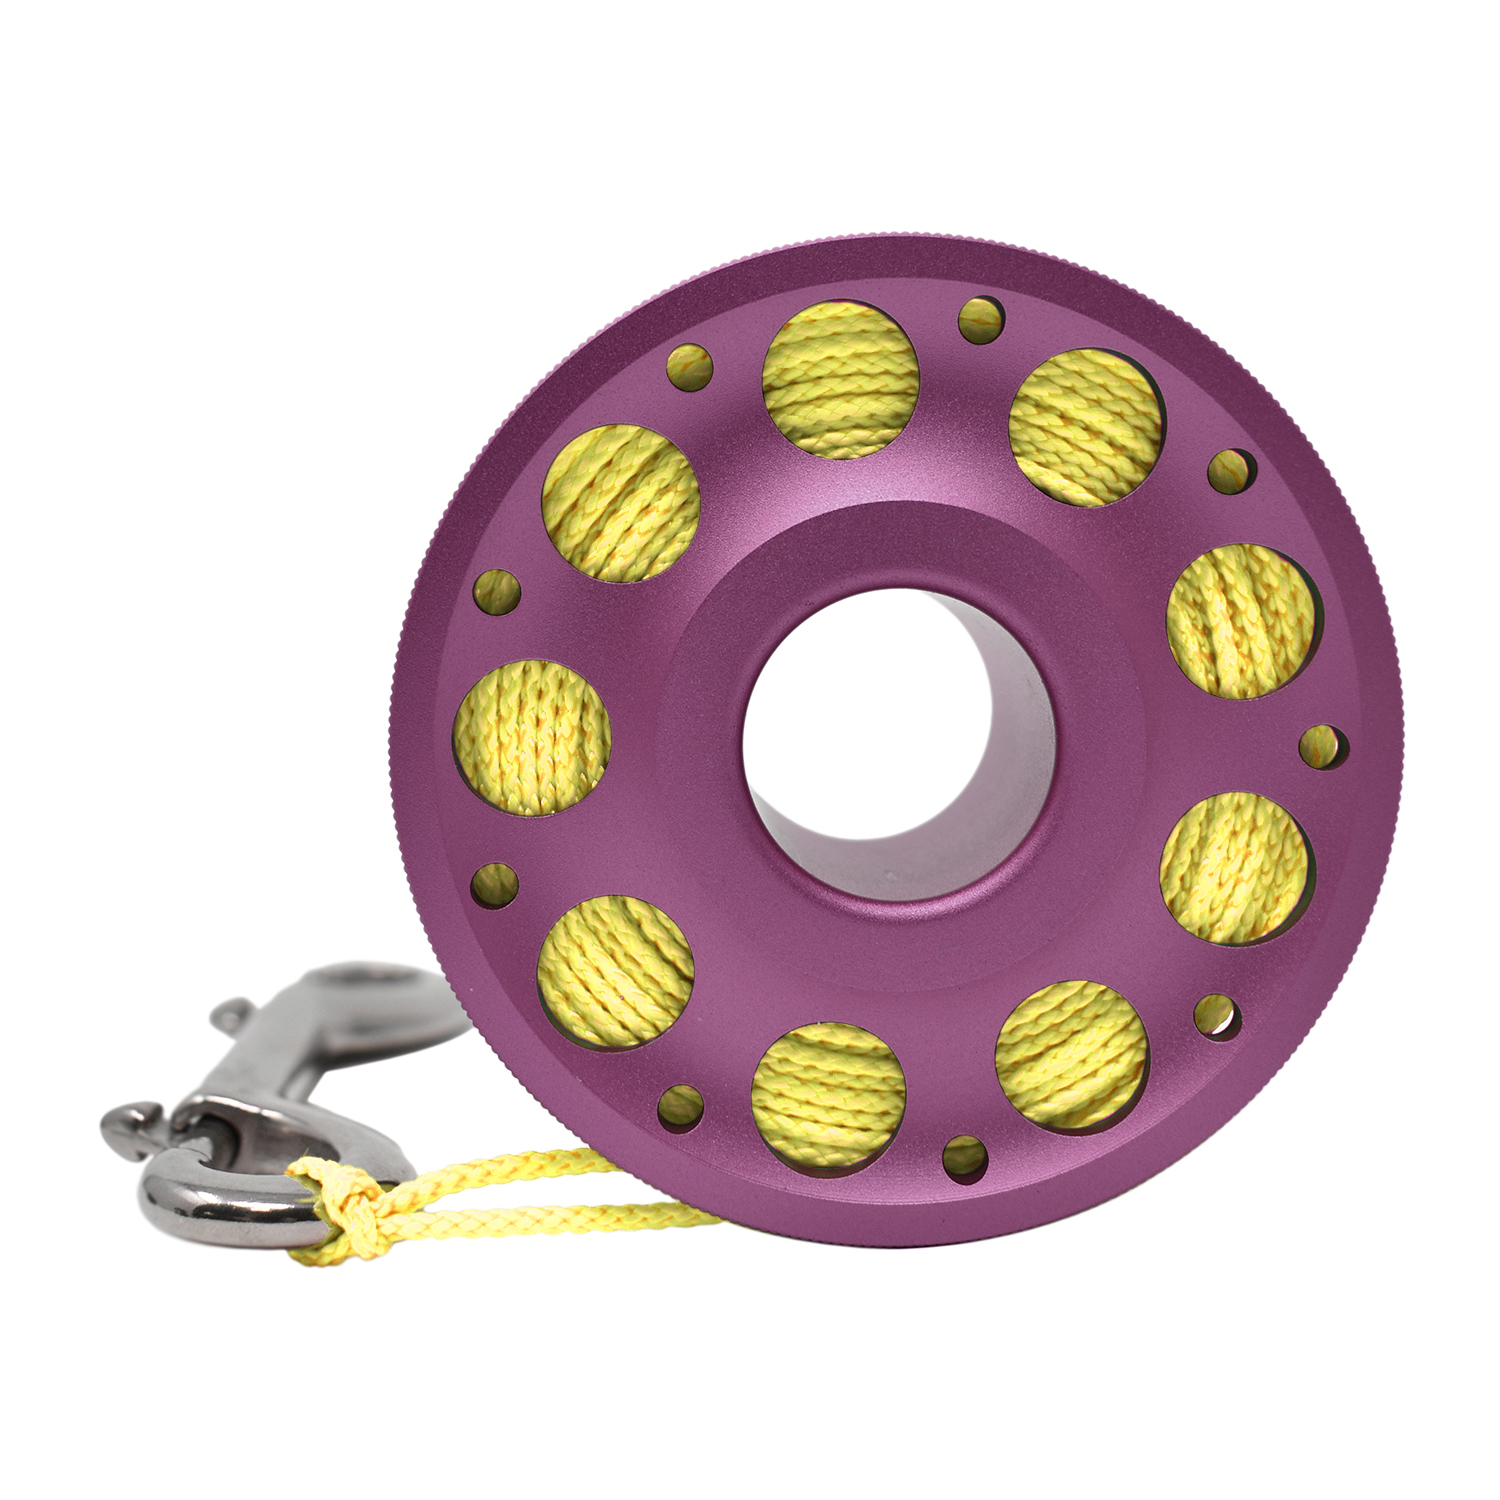 Aluminum Finger Spool 100ft Dive Reel w/ Spinning Holder, Pink/Yellow - image 4 of 4